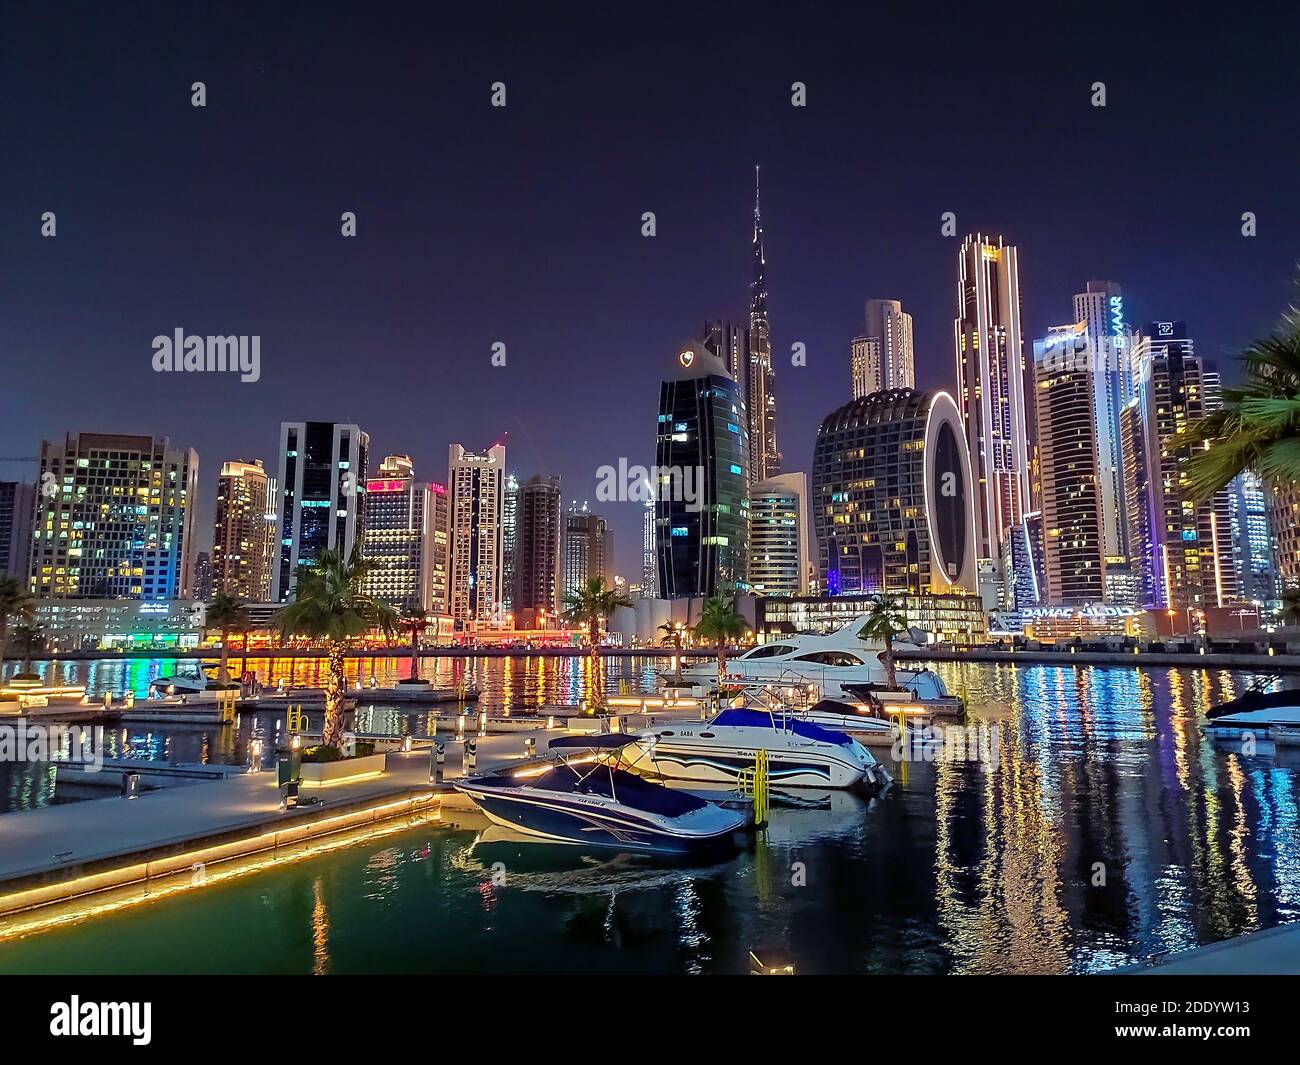 Dubai, United Arab Emirates - October 19, 2020: Downtown Dubai modern cityscape skyline view from the Marasi marina in the Business Bay at night in th Stock Photo